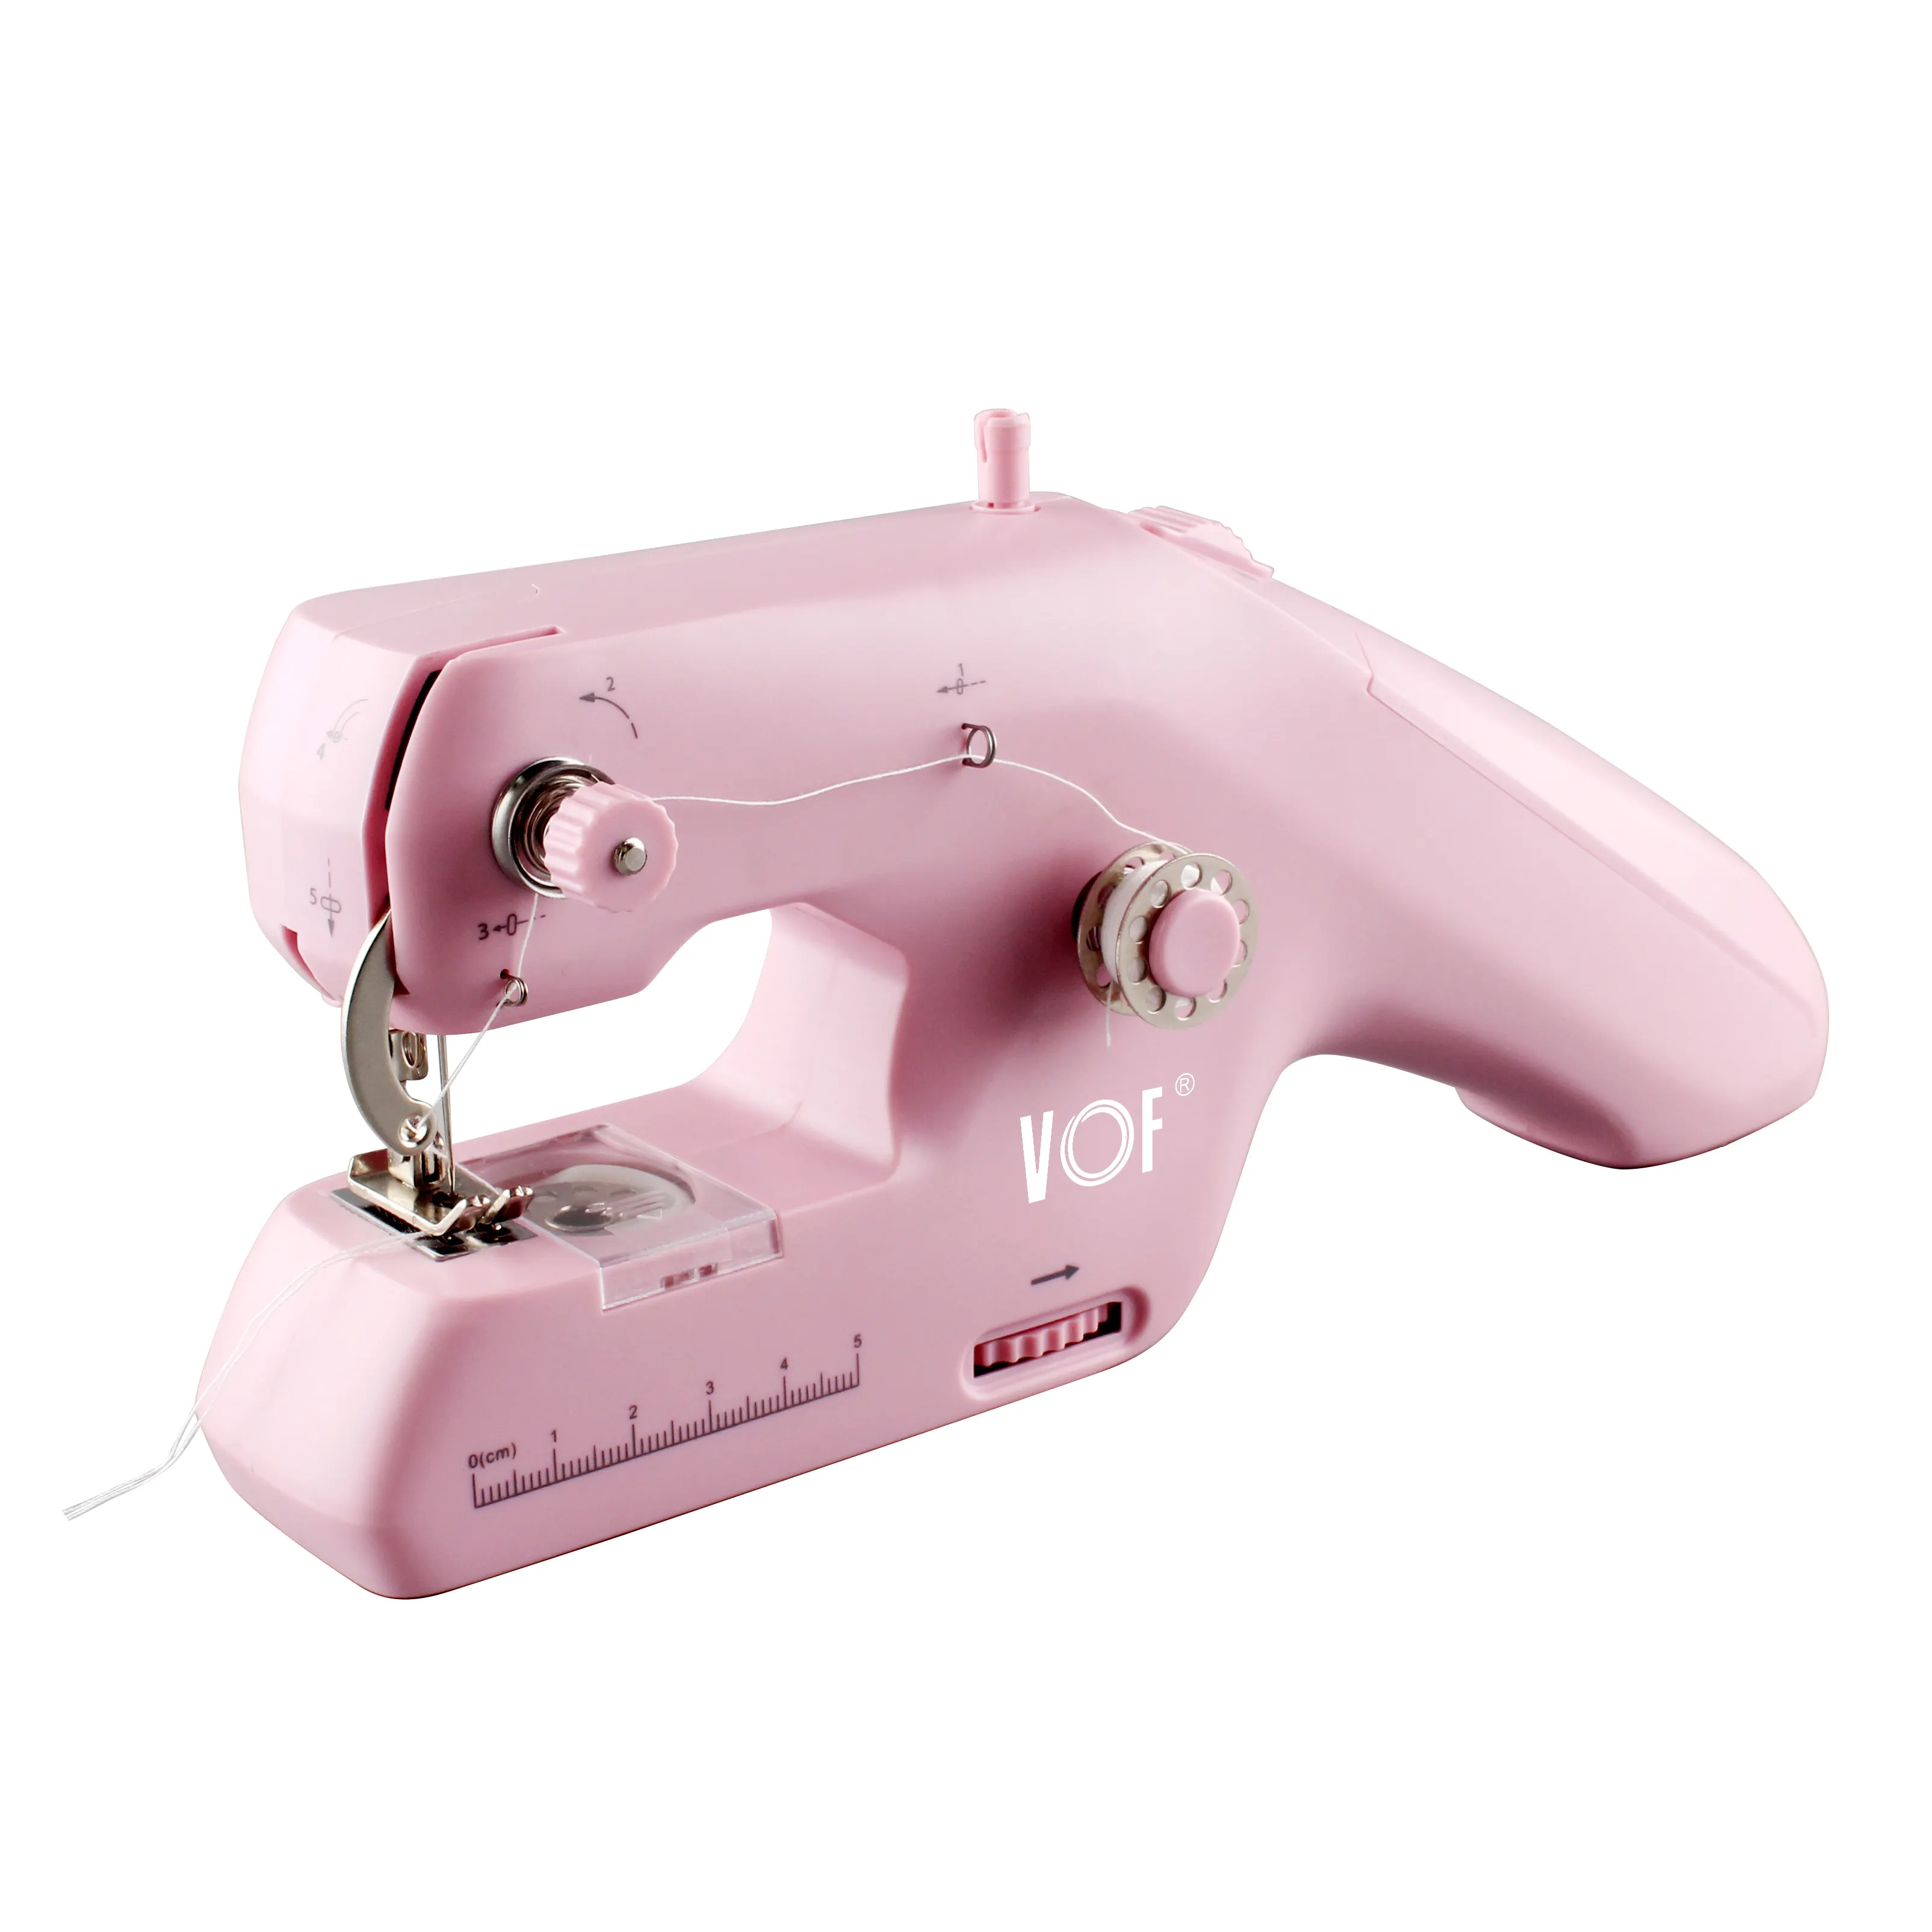 VOF 2022 New ZDML-6 Handheld Mini Sewing Machine Double Thread Home Portable Sewing Machine